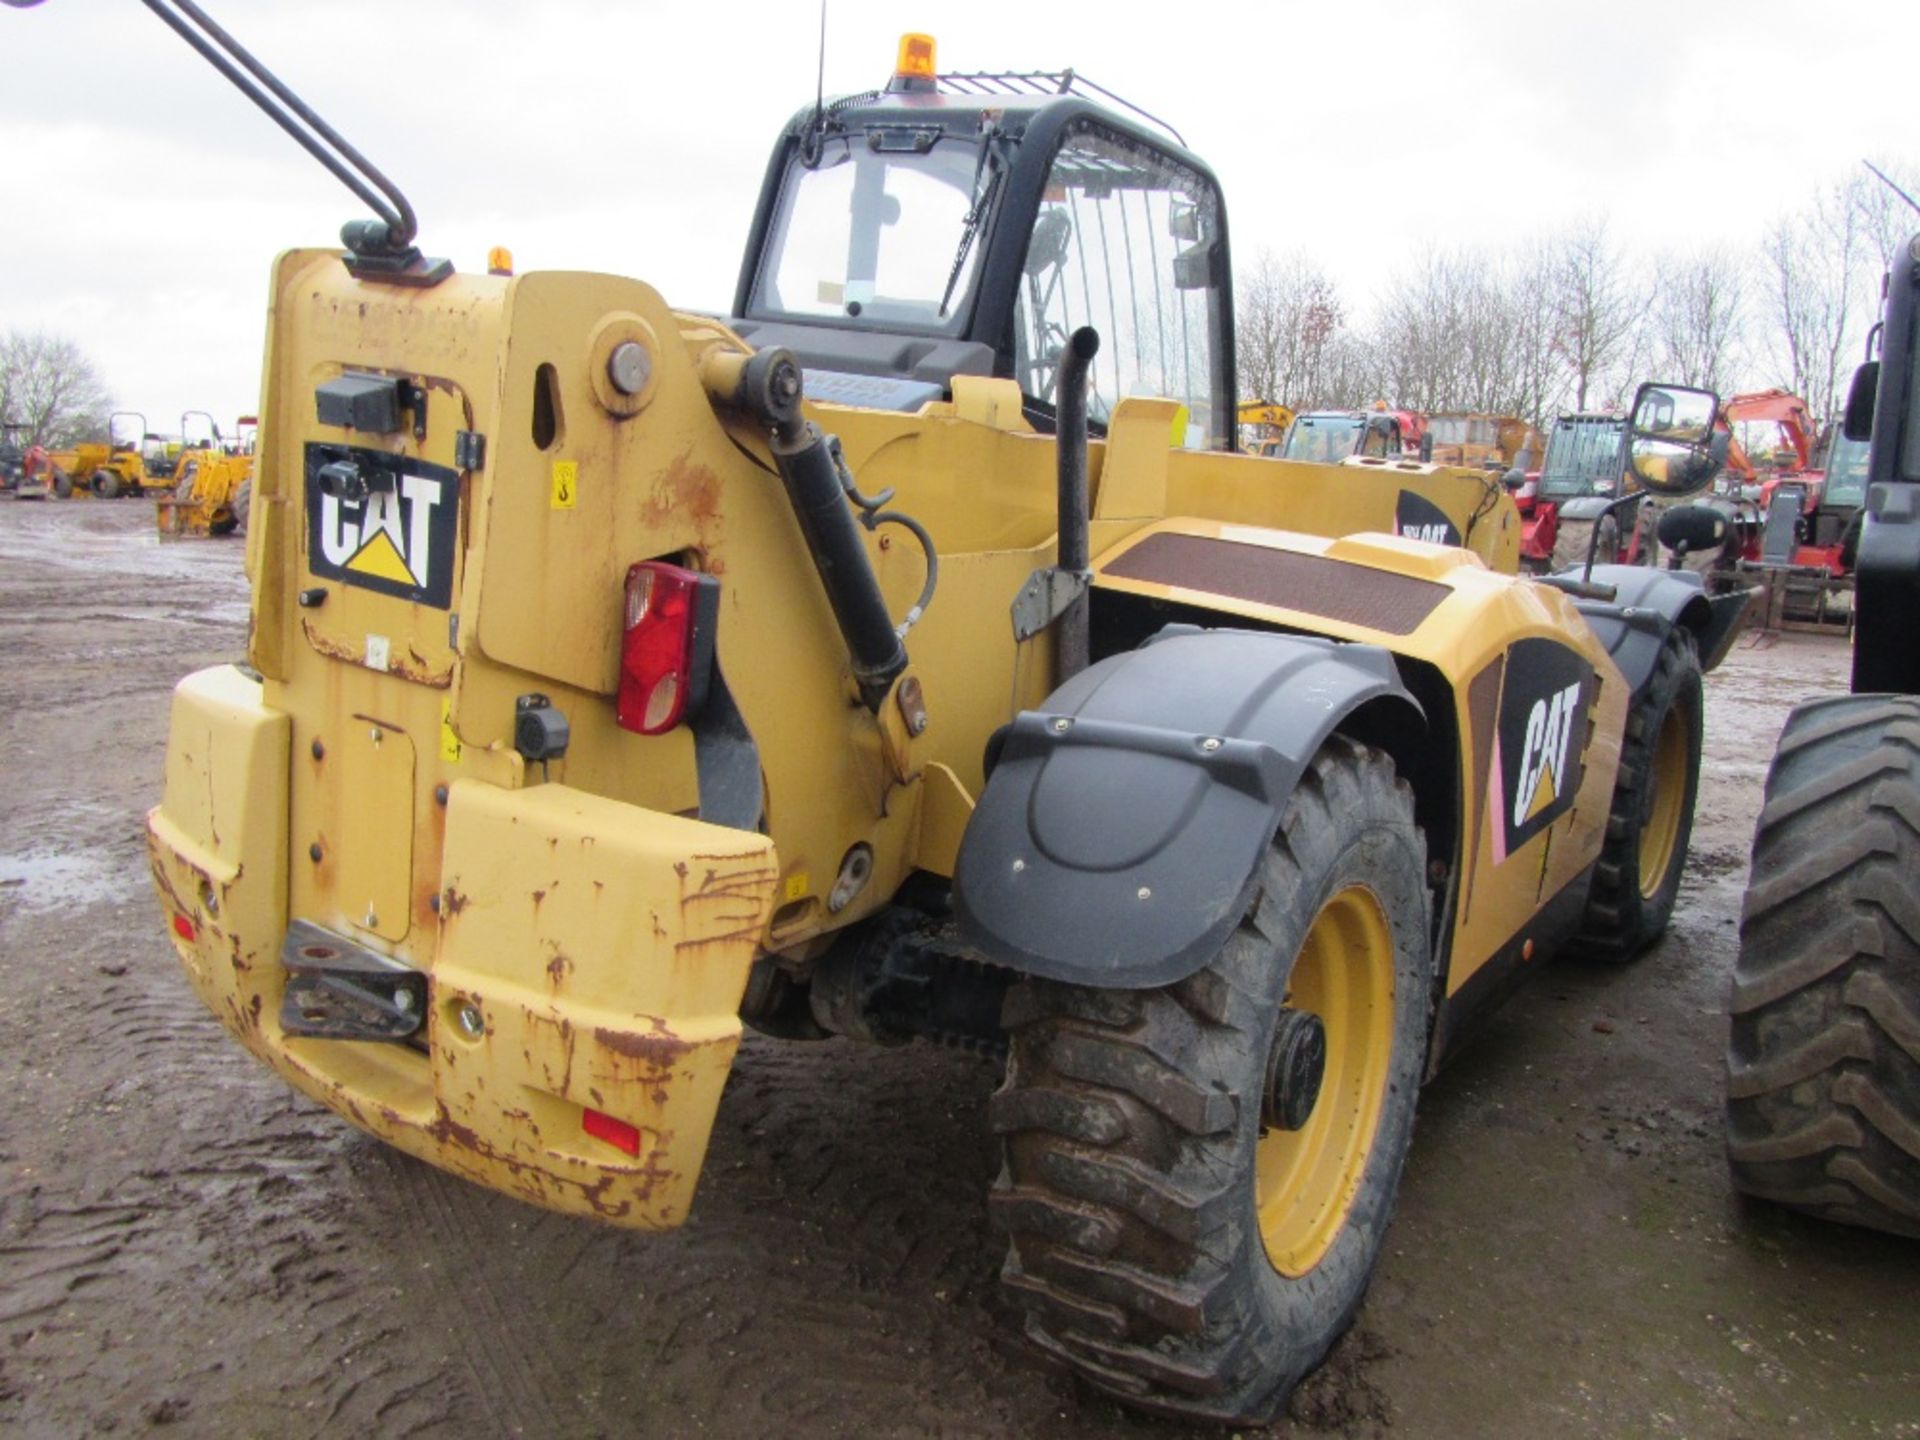 Caterpillar TH141 14m Telehandler c/w new set of switches in office Approx 4075 Hrs Ser. No. - Image 5 of 5